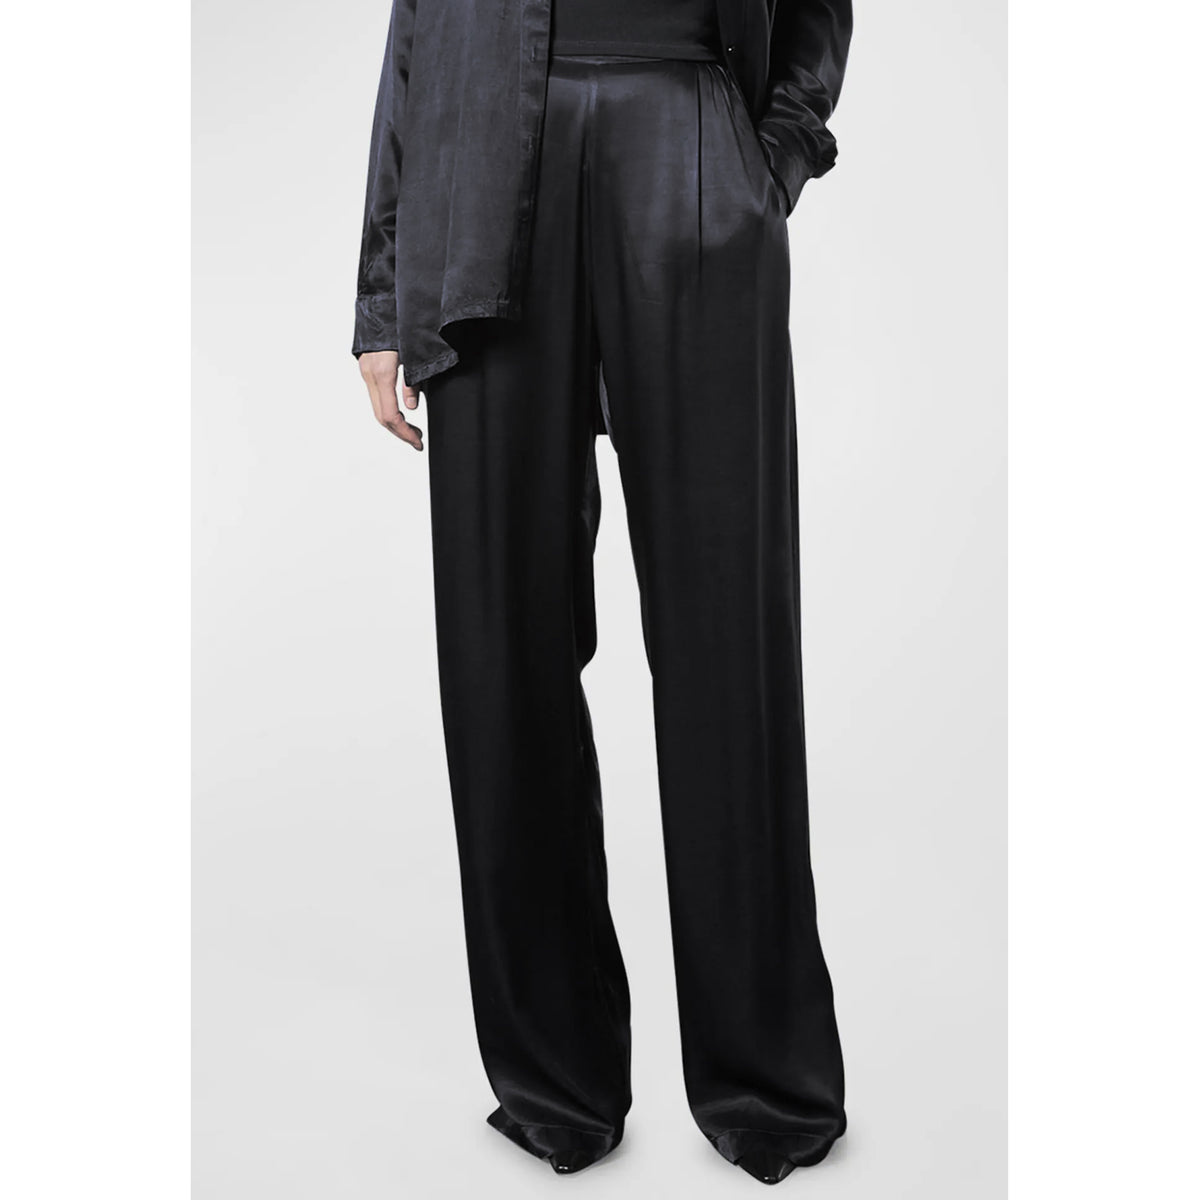 Enza Costa Pleated Satin Panted in Black